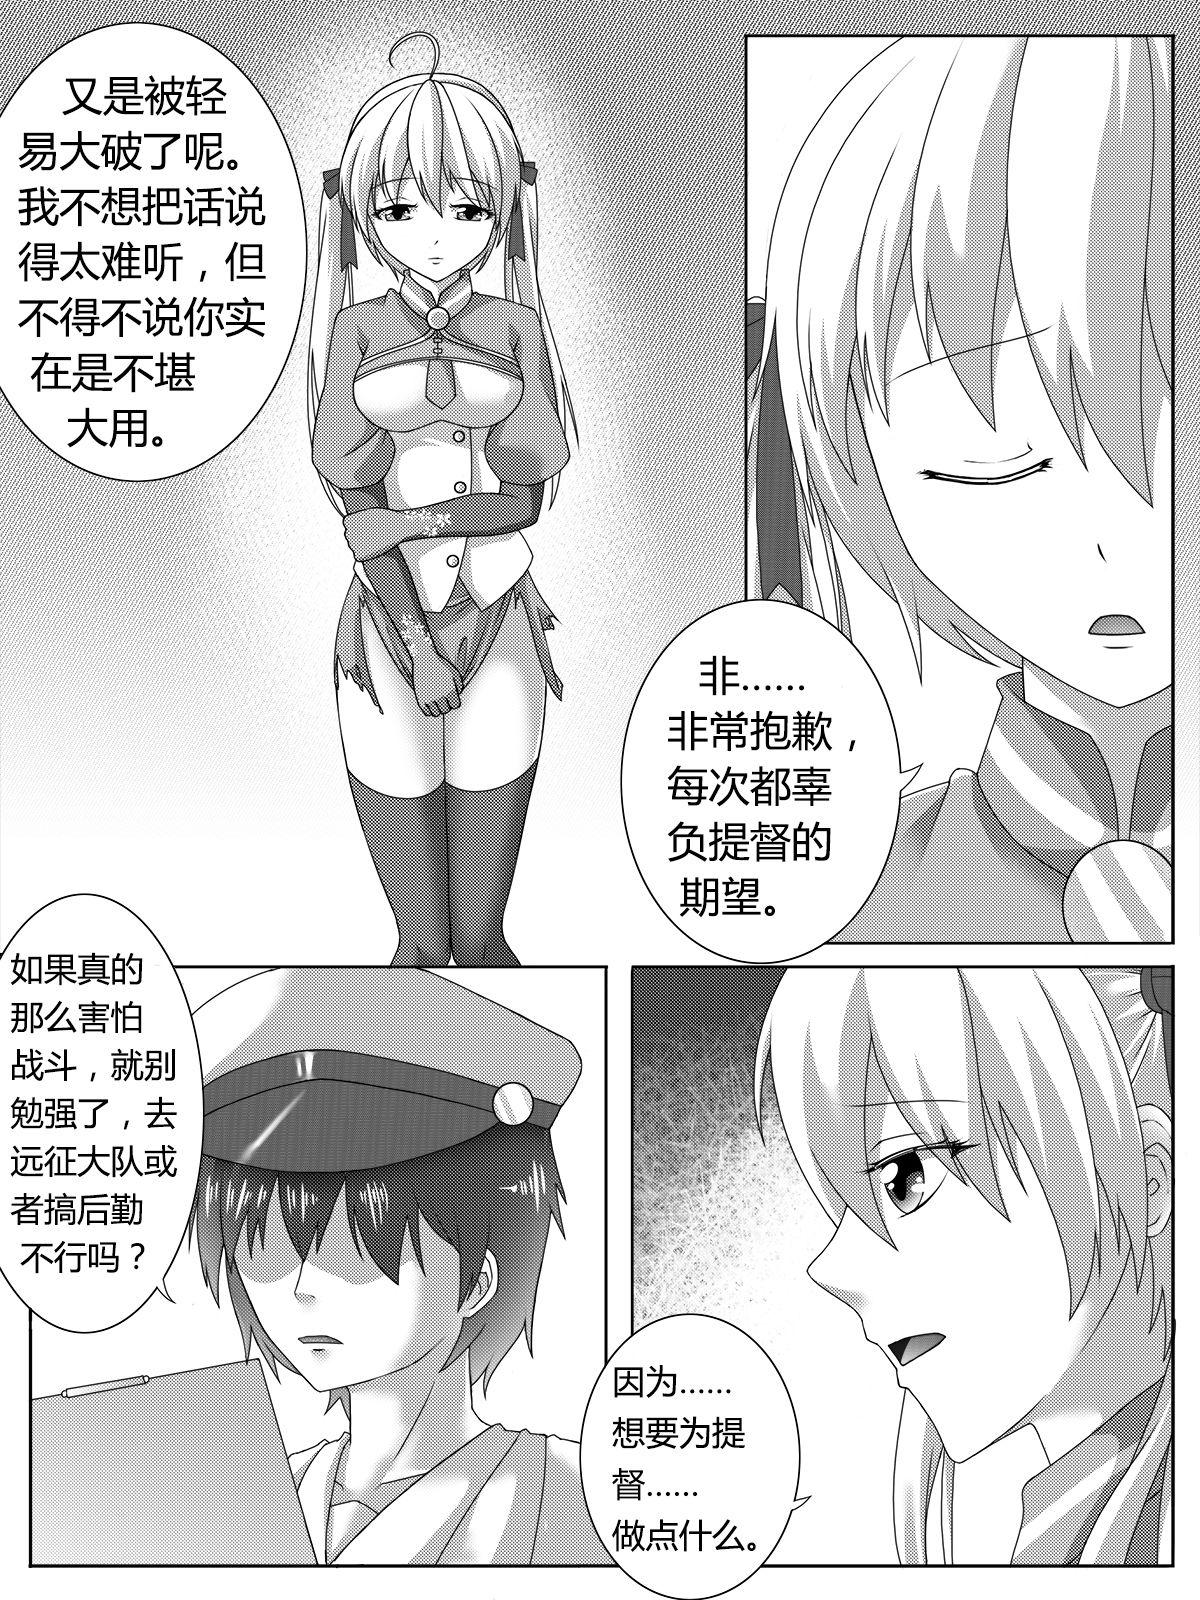 Rimjob Punishment of Ooyodo's Heavily Damage - Warship girls Caiu Na Net - Page 3